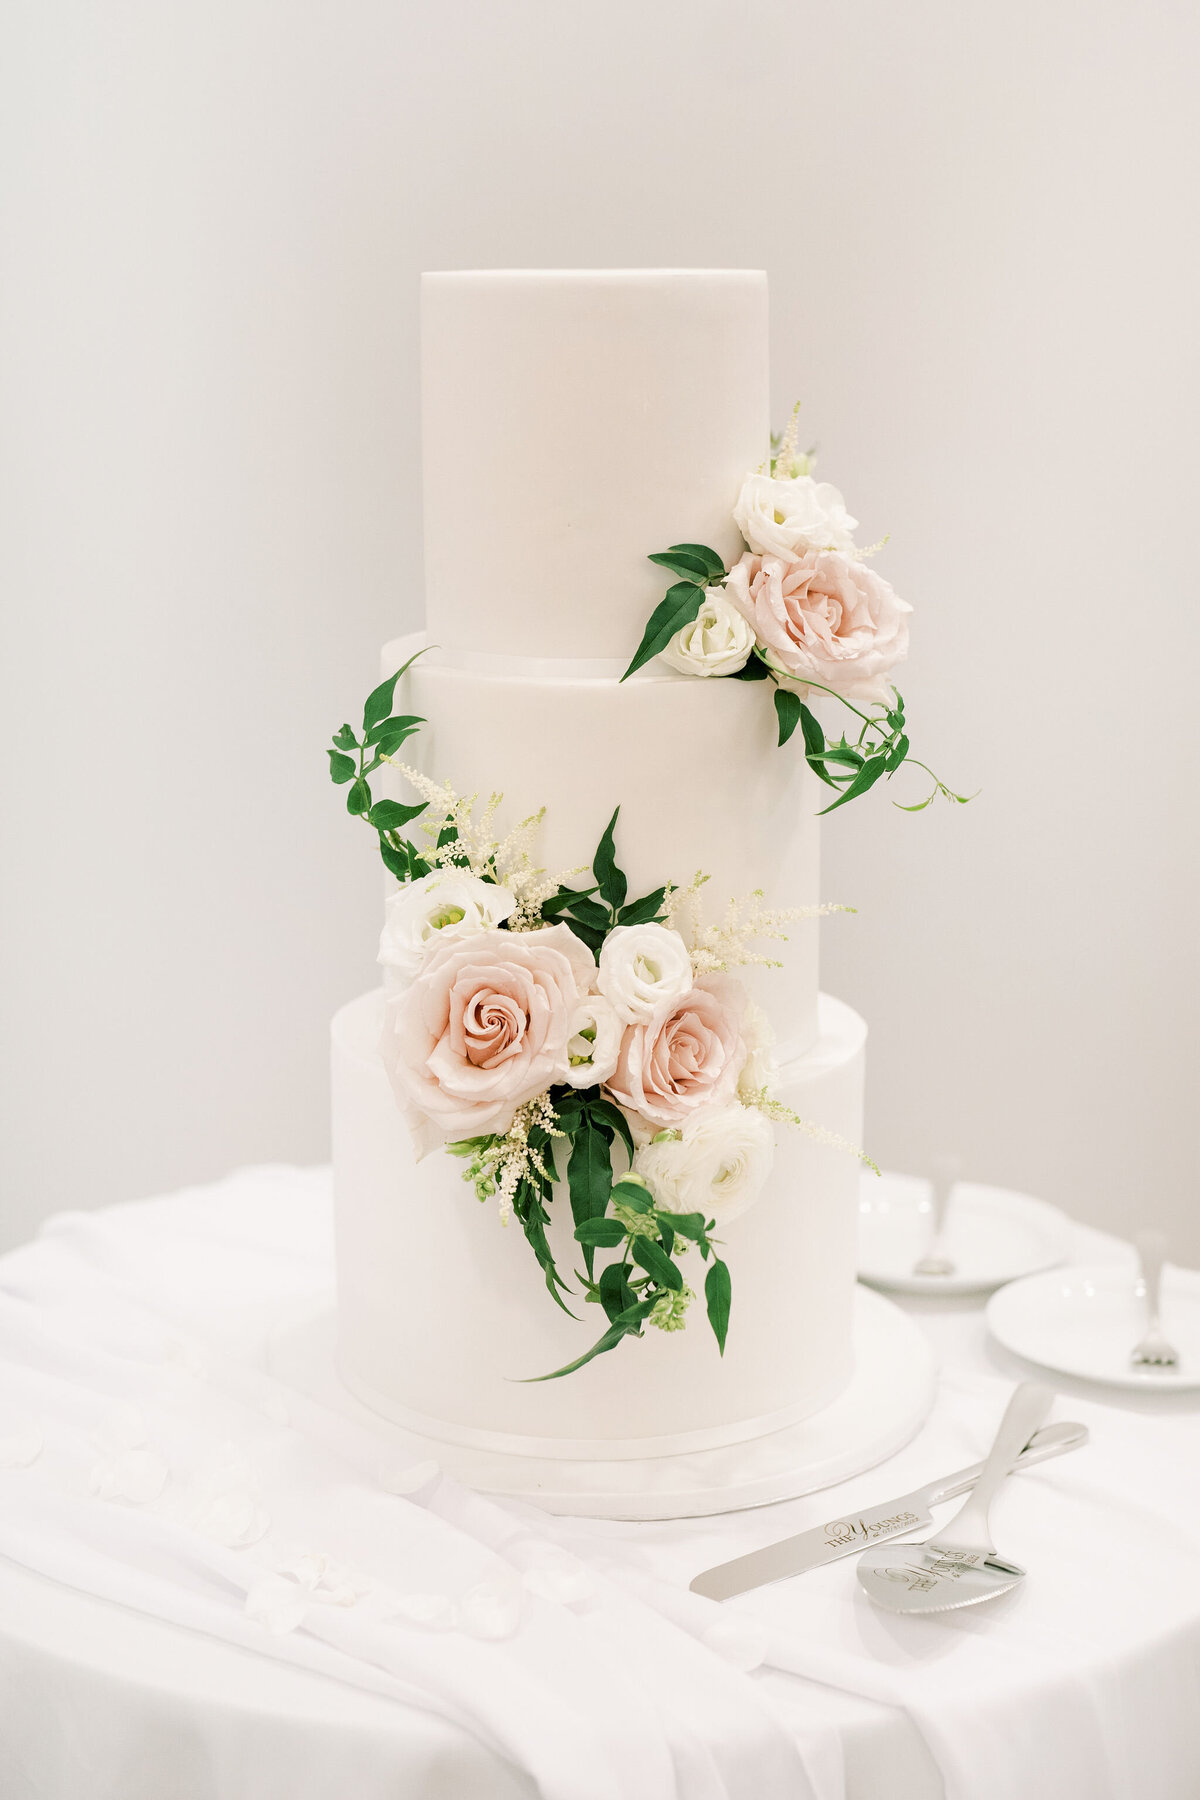 A three-tier white wedding cake adorned with pink and white roses and green foliage graces a table covered with a white cloth at this stunning Banff Alberta wedding. Cake-cutting utensils are nearby, ready for the couple to make their first slice.